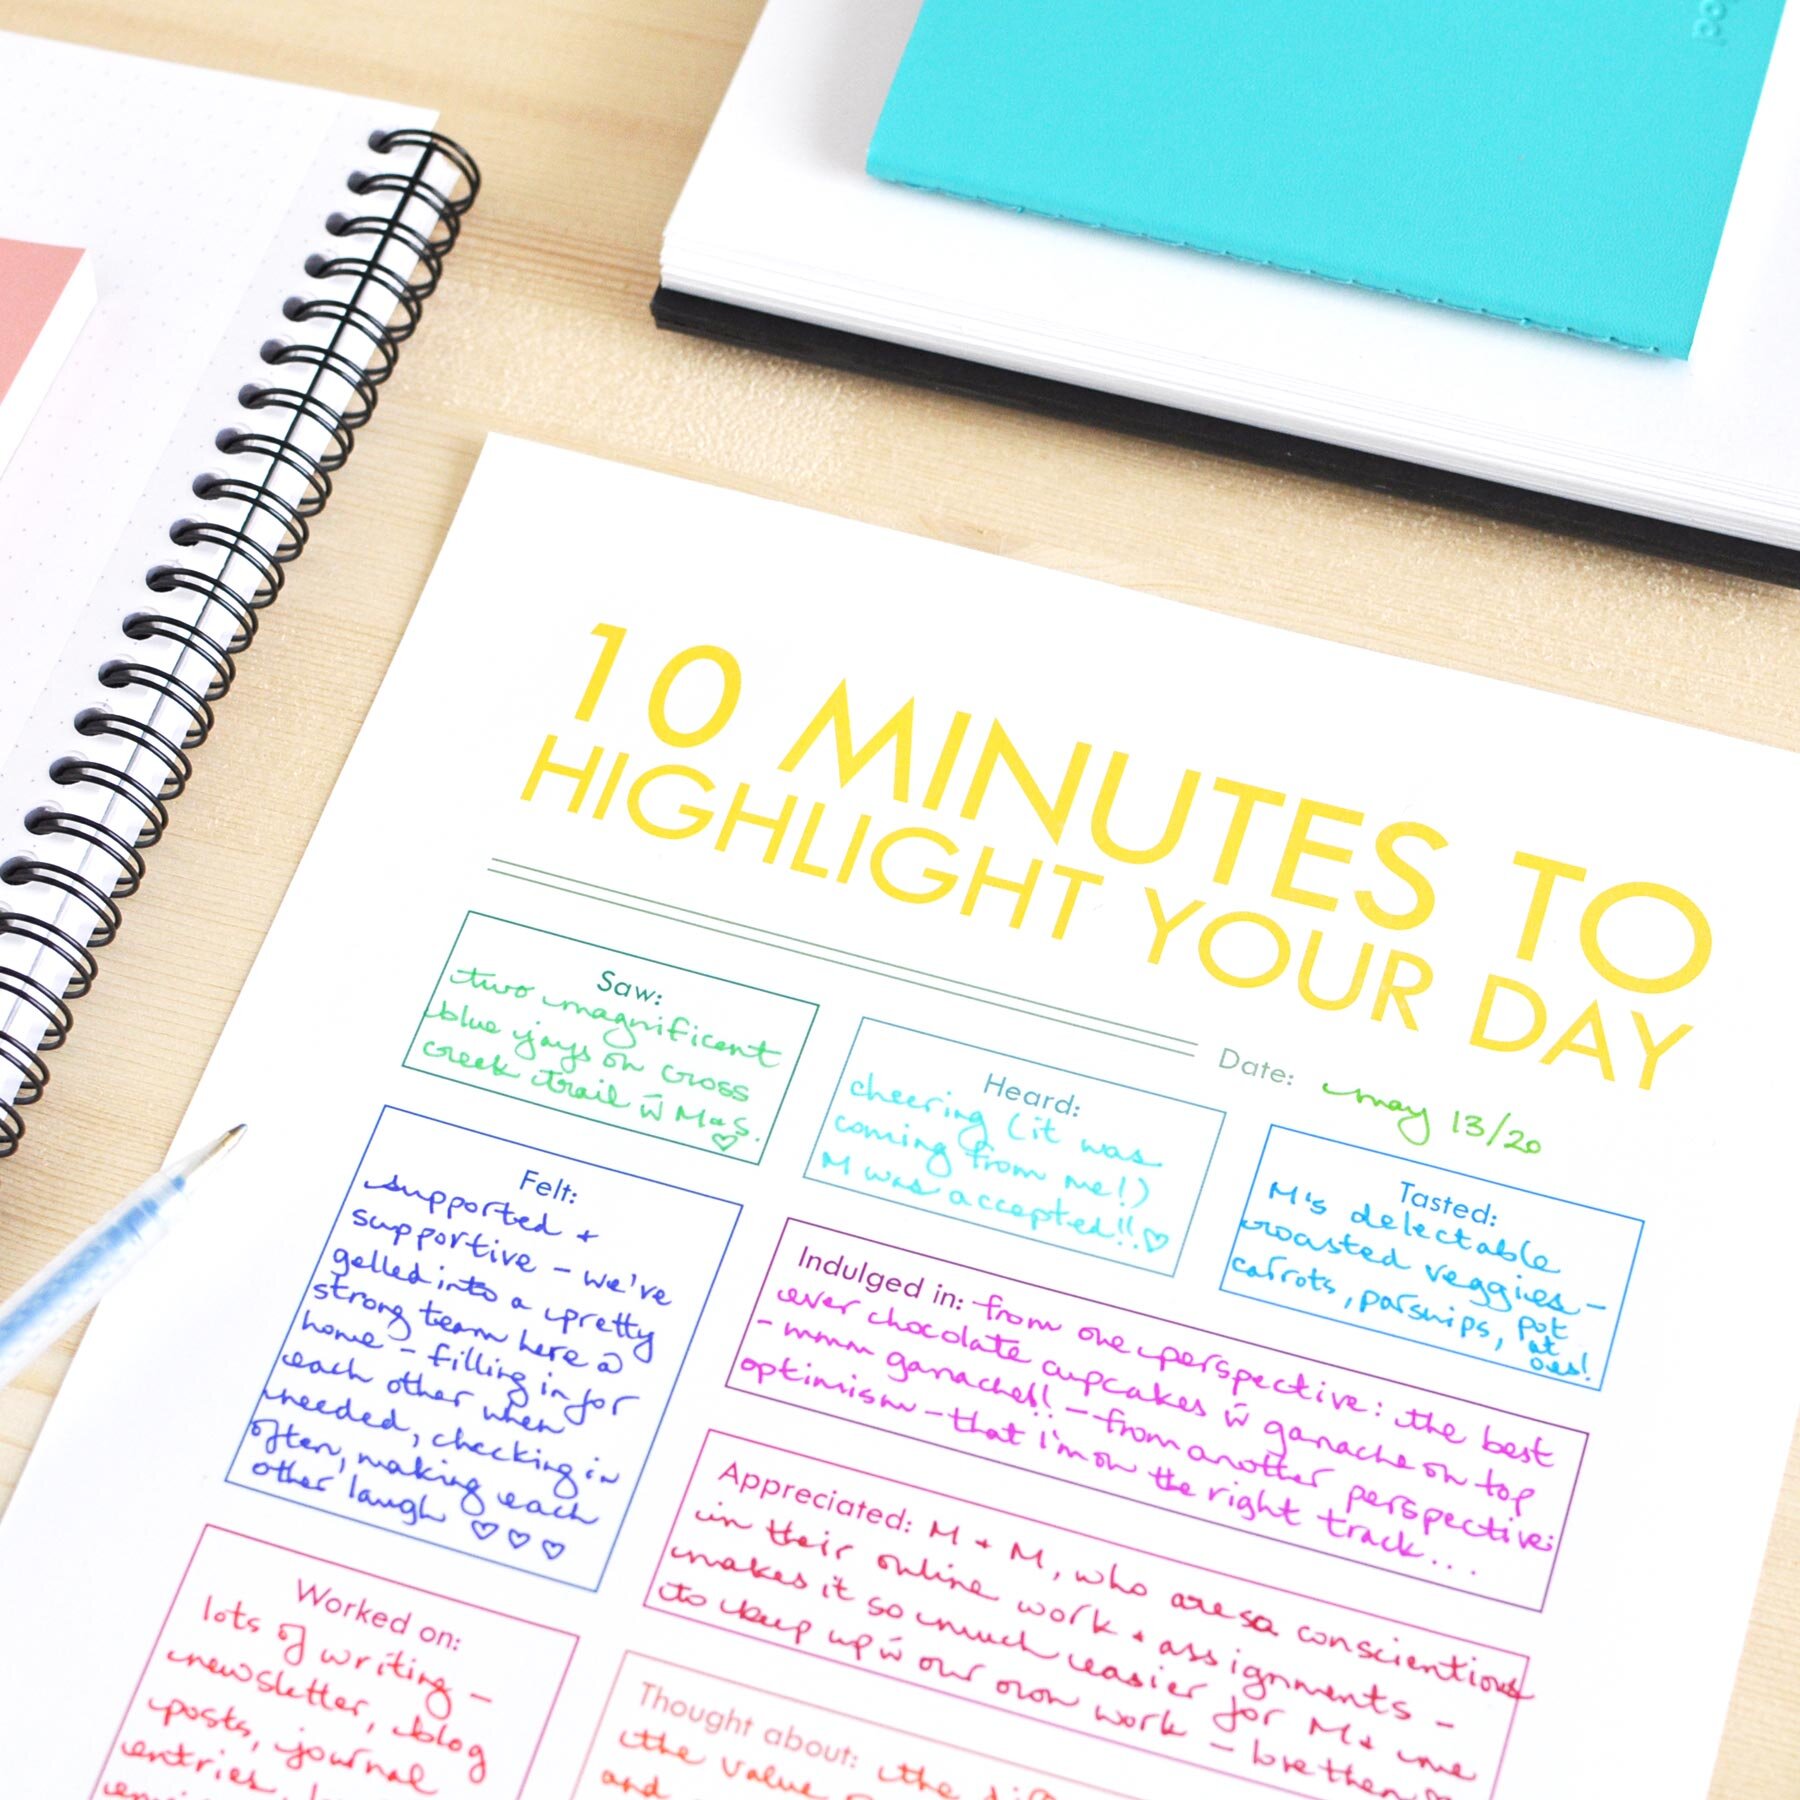 fordel Udgående halv otte 10 Minutes to Highlight Your Day - Free printable journal page roundup —  Christie Zimmer